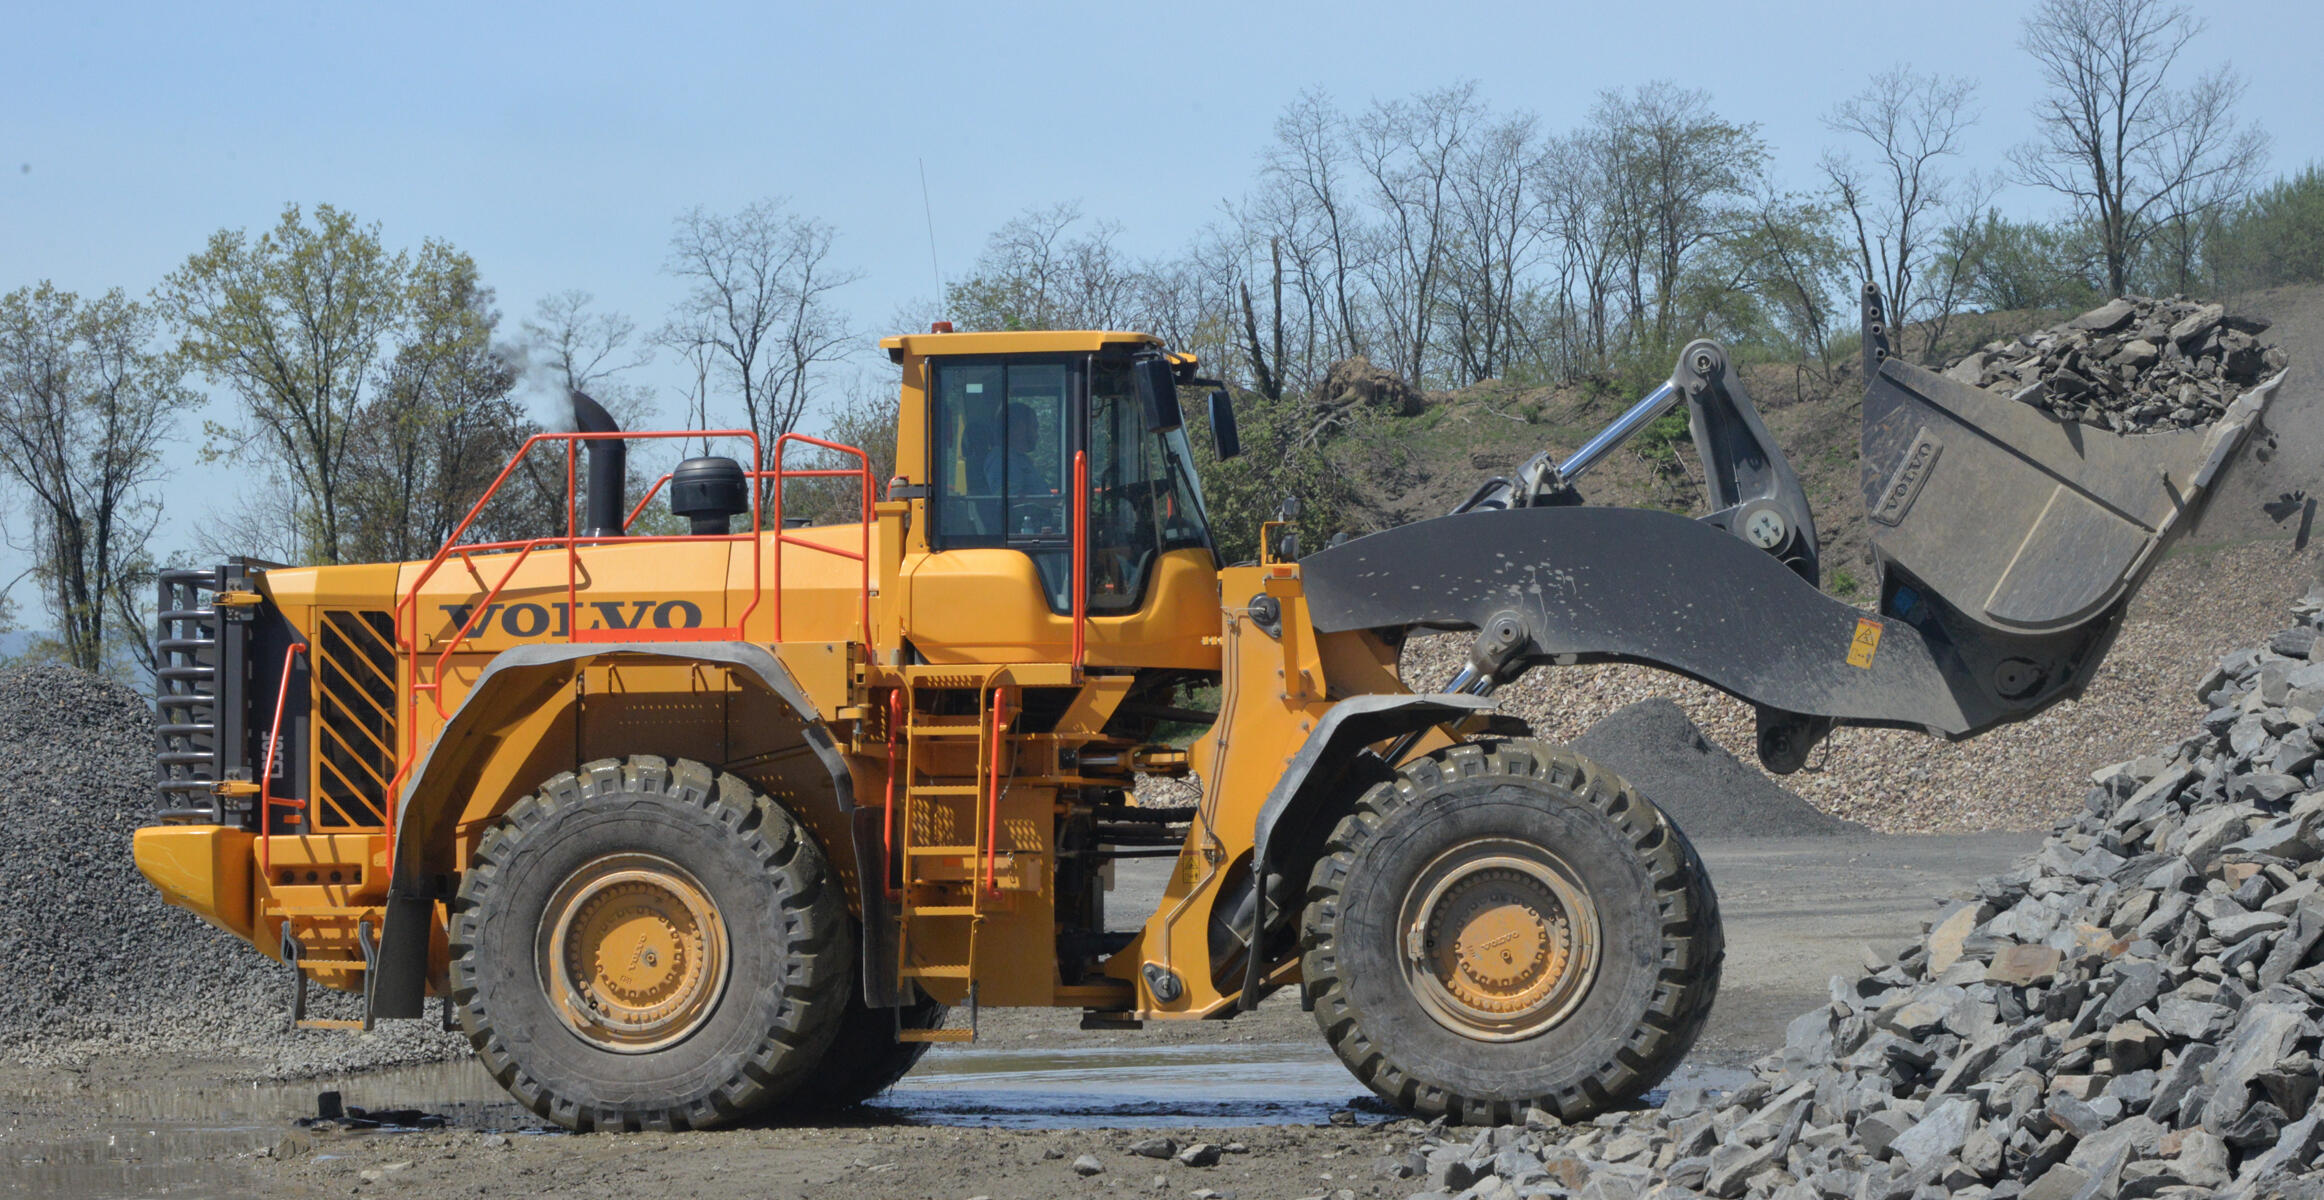 Volvo articulated truck at Lycoming County landfill